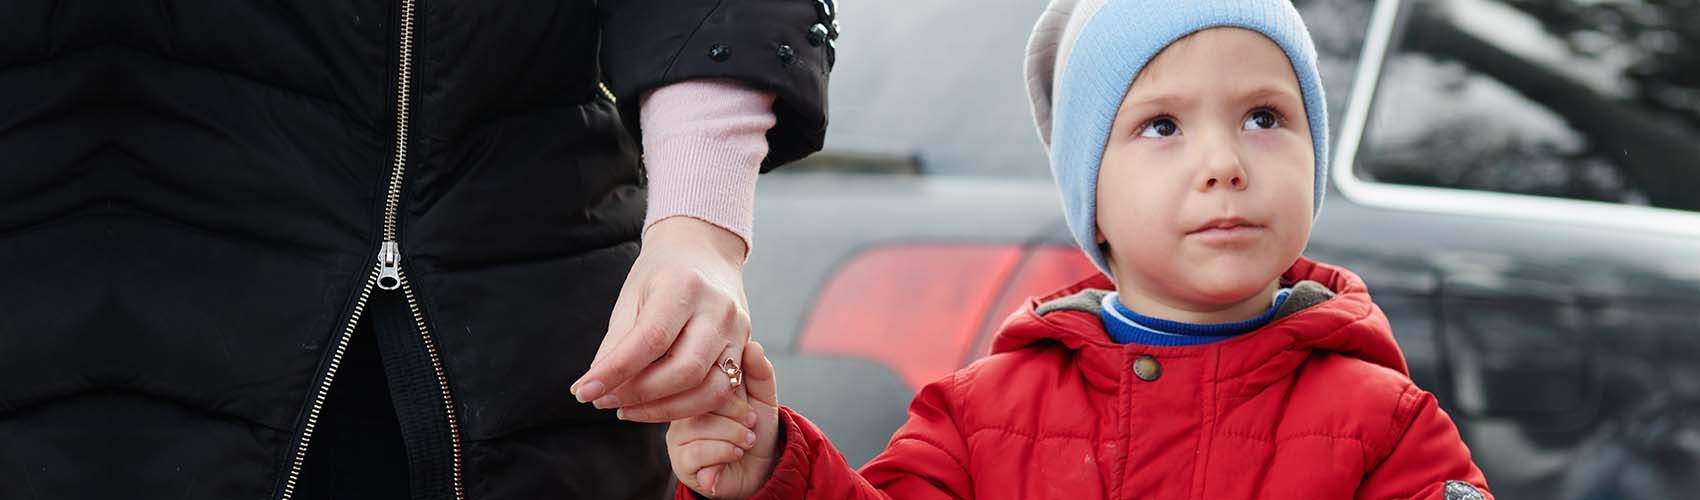 A Ukrainian boy wears a hat and coat while holding his mother's hand as the pair stands outside. 